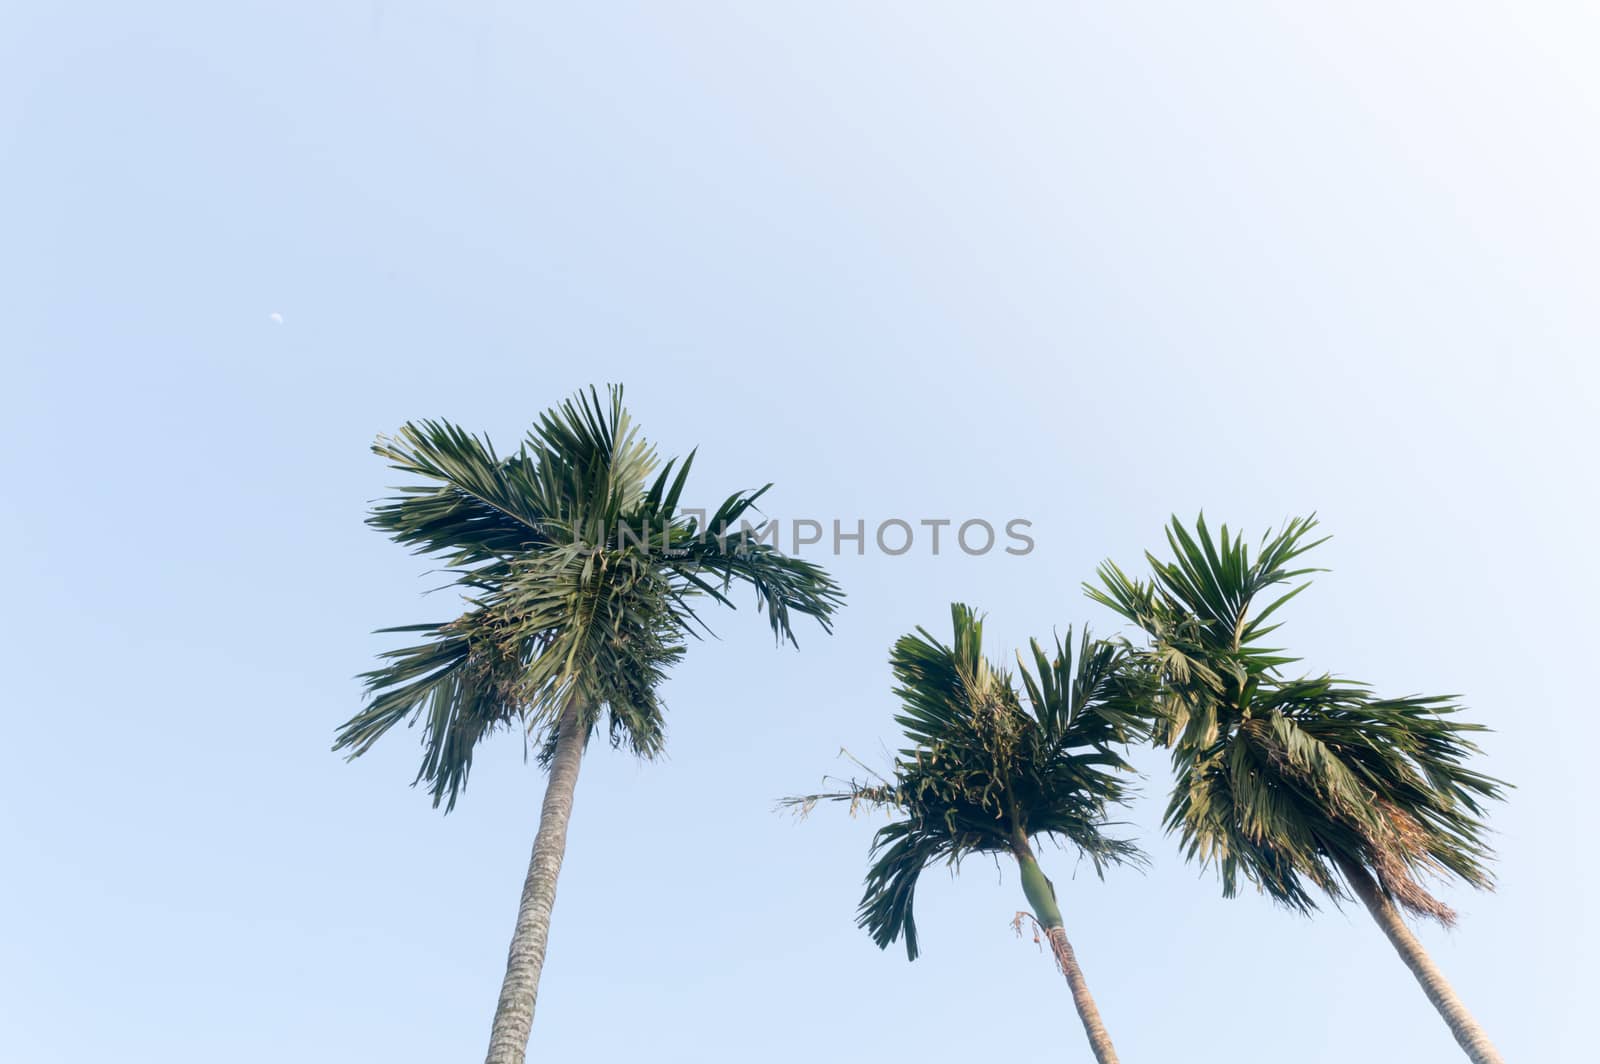 The Areca palm tree (Areca nut) against vibrant blue color sunset sky in summer illuminated by sunlight. Low angel View. Beauty in nature seasonal theme Background image. Kolkata India.